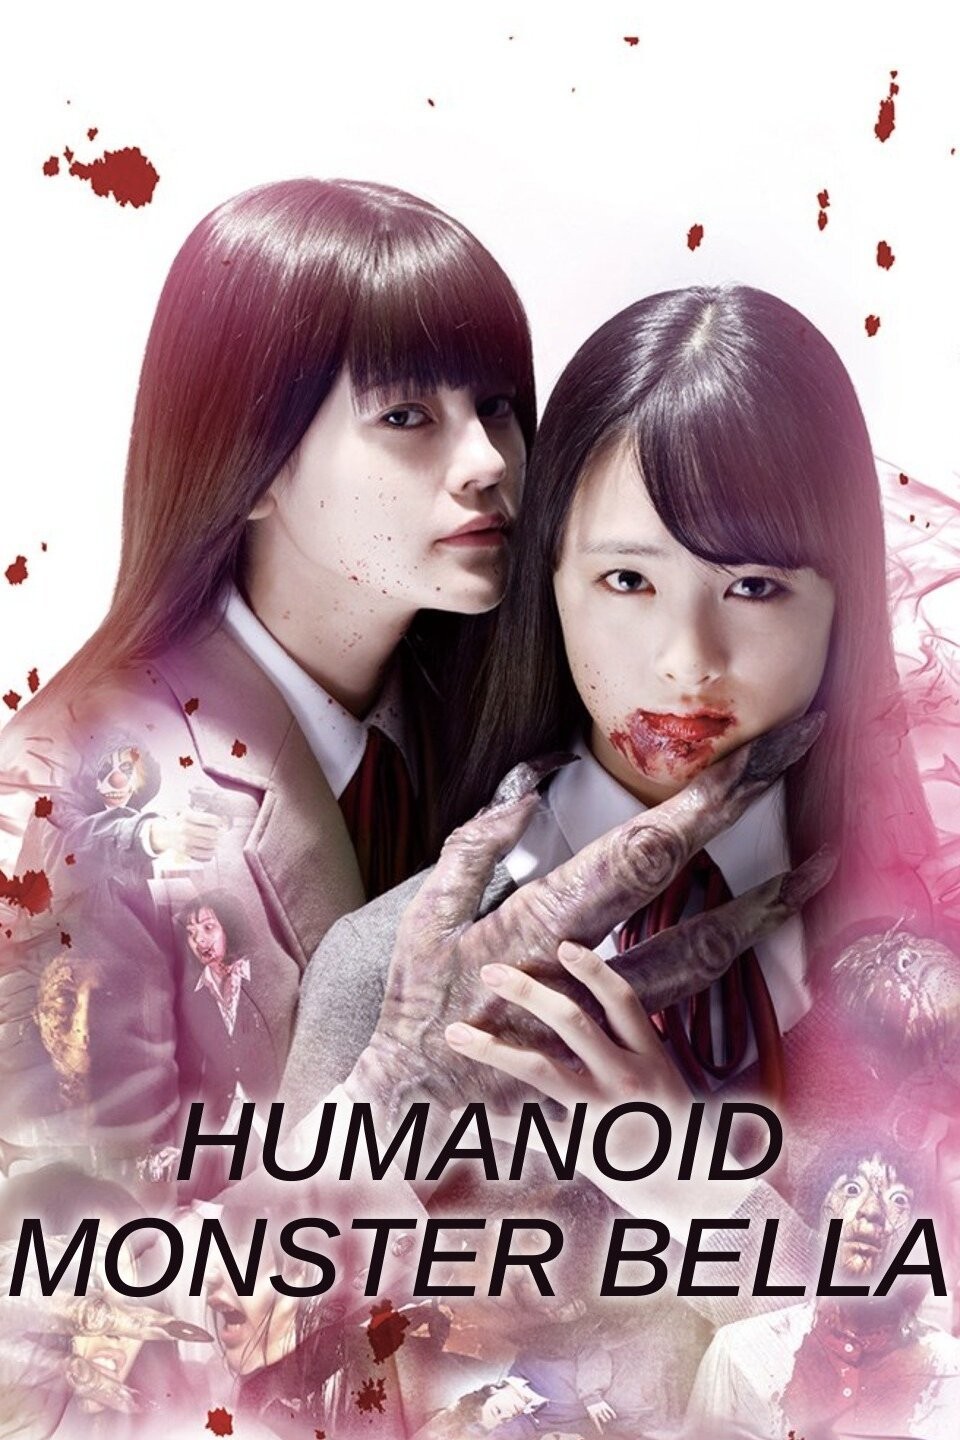 Bela: Humanoid Monster streaming: where to watch online?